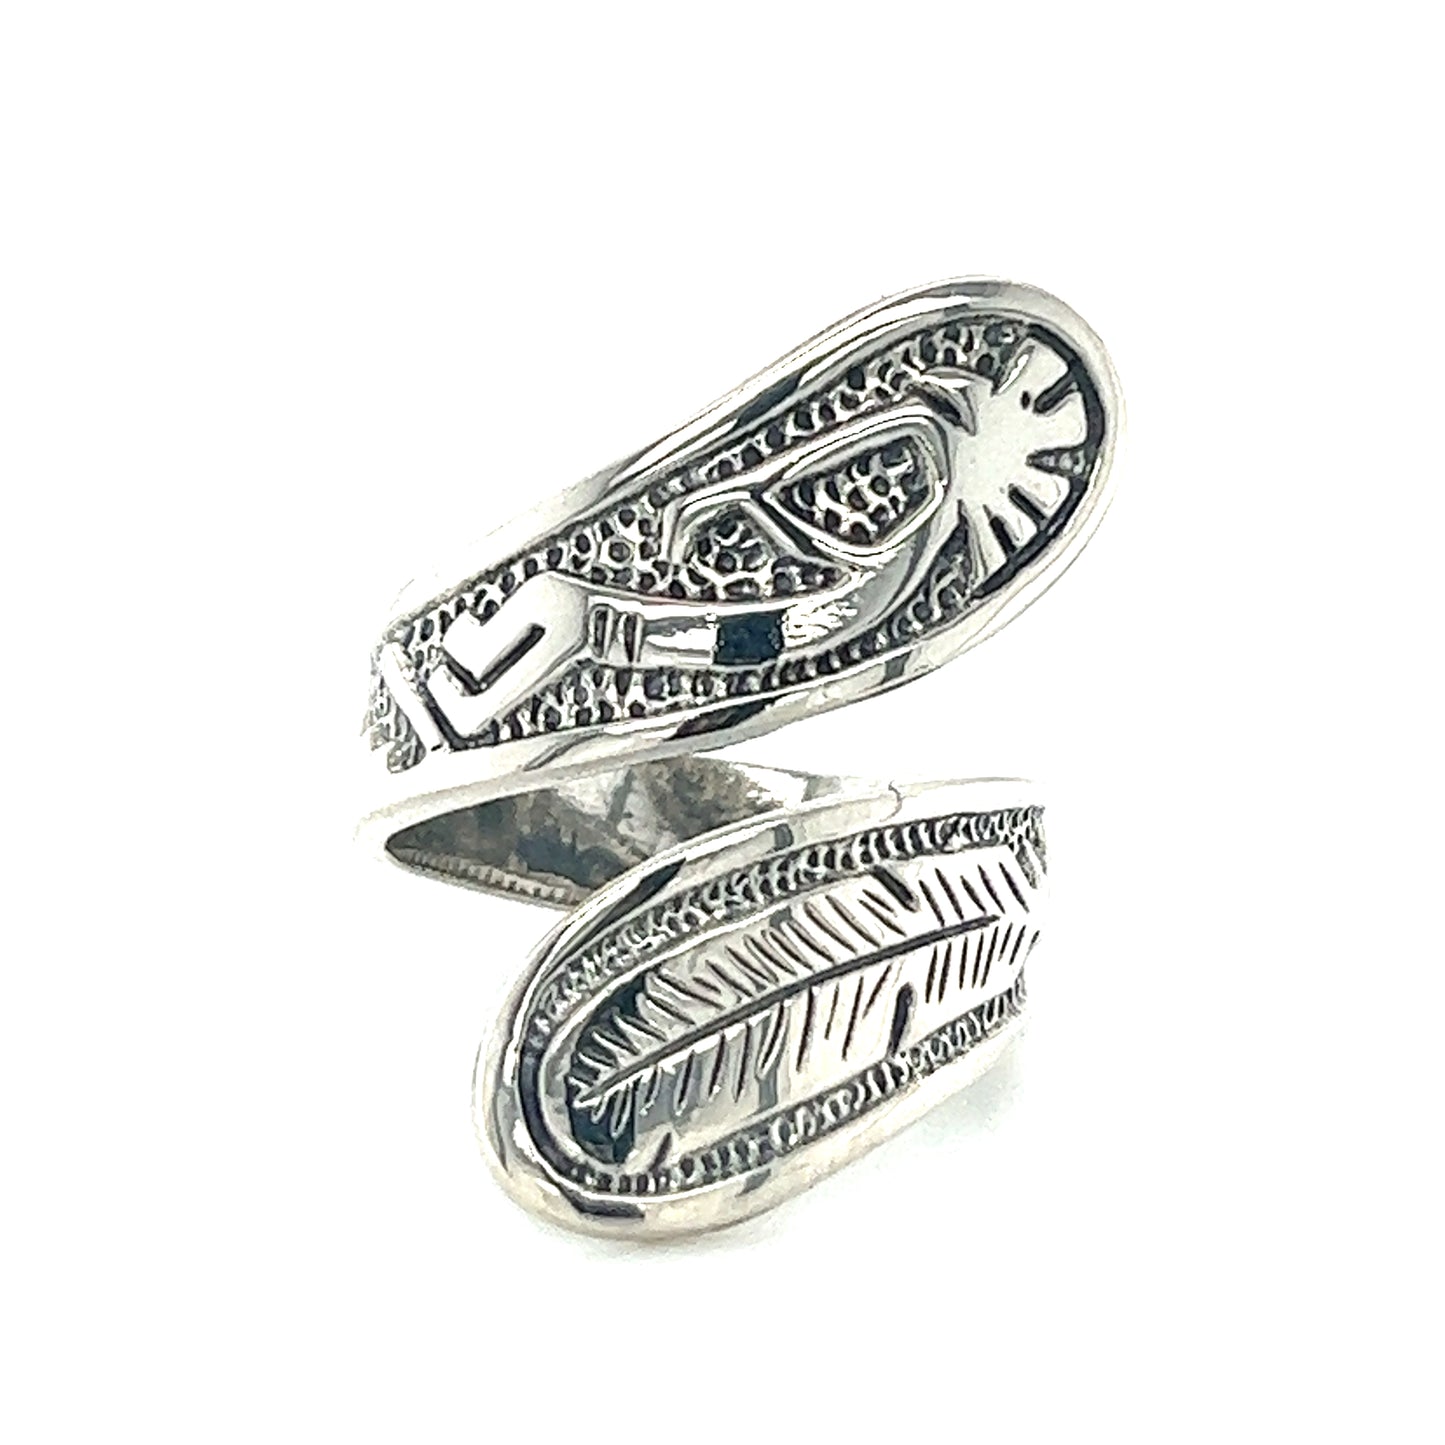 A Southwest-inspired Super Silver Kokopelli and Feather Wrap Ring with intricate Kokopelli and feather designs. This unique and eye-catching adjustable ring showcases the rich artistic traditions of the region.